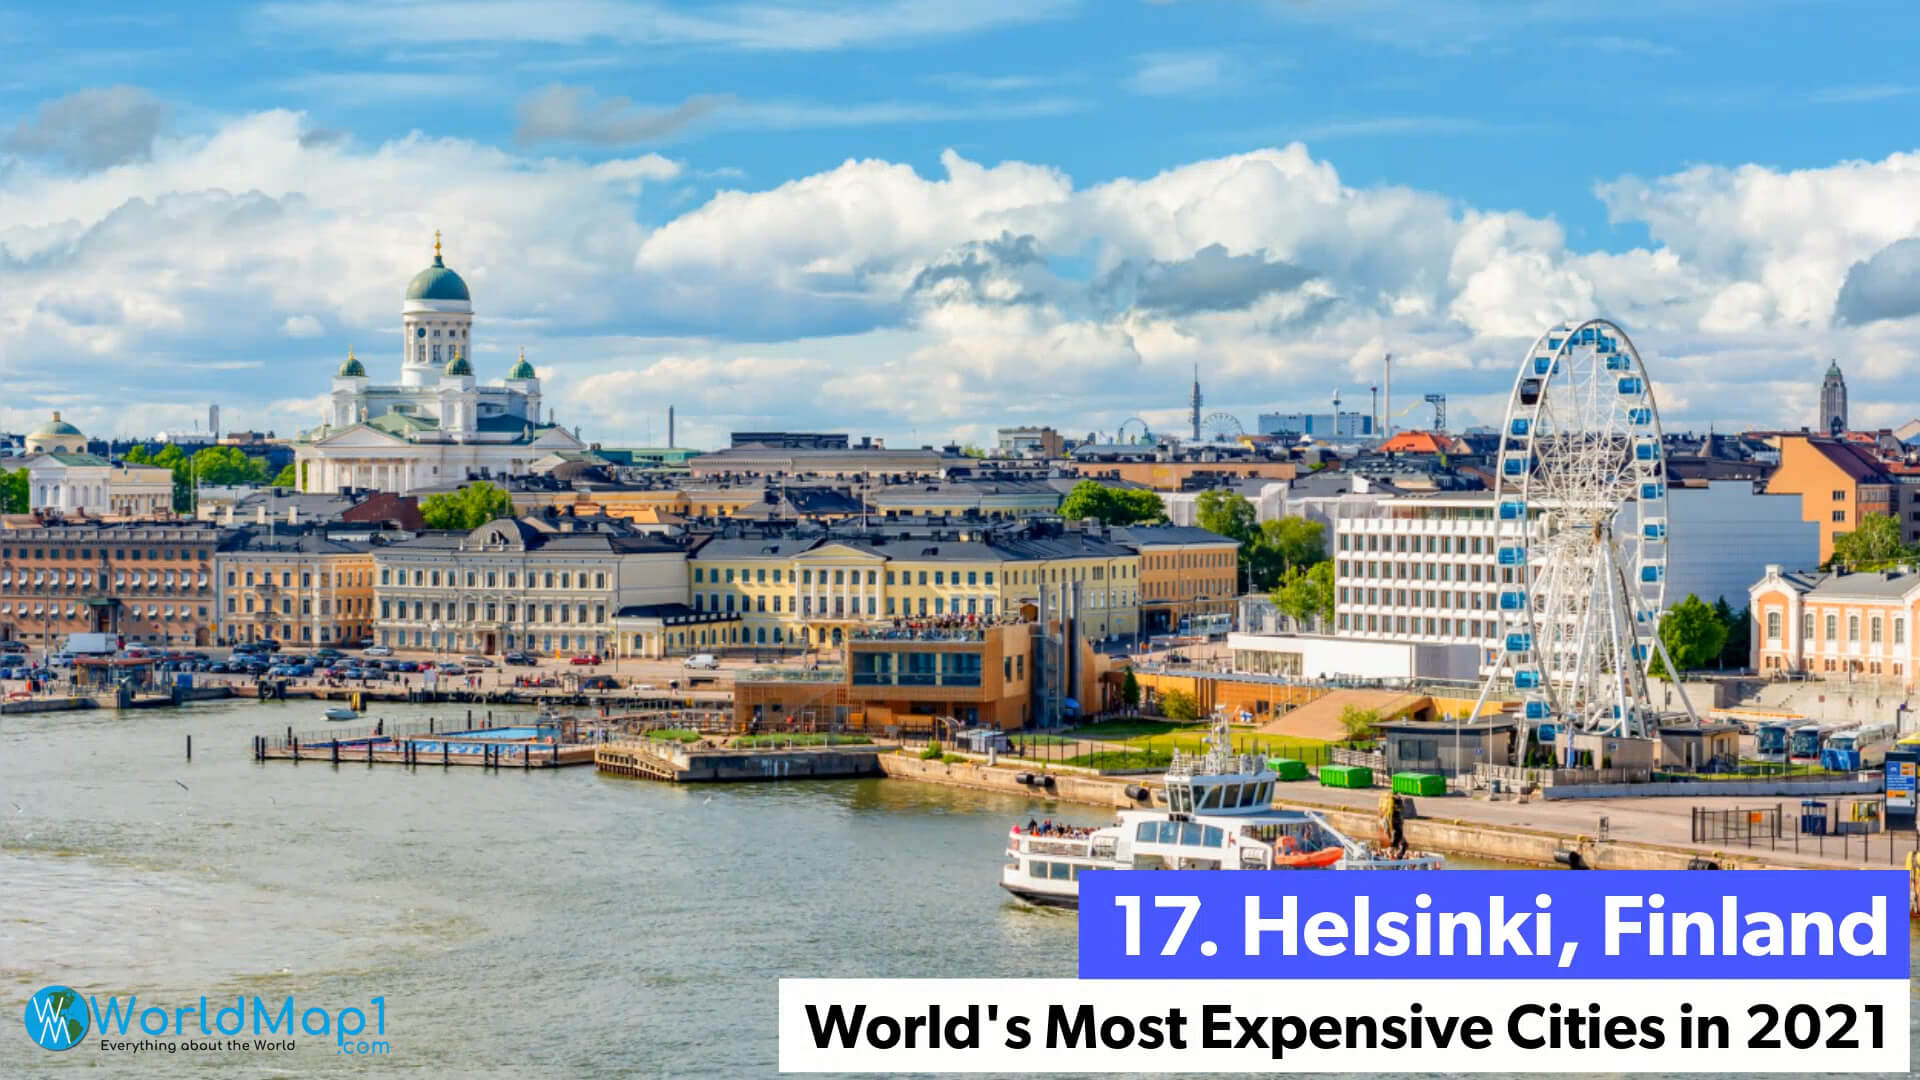 World's Most Expensive Cities - Helsinki, Finland